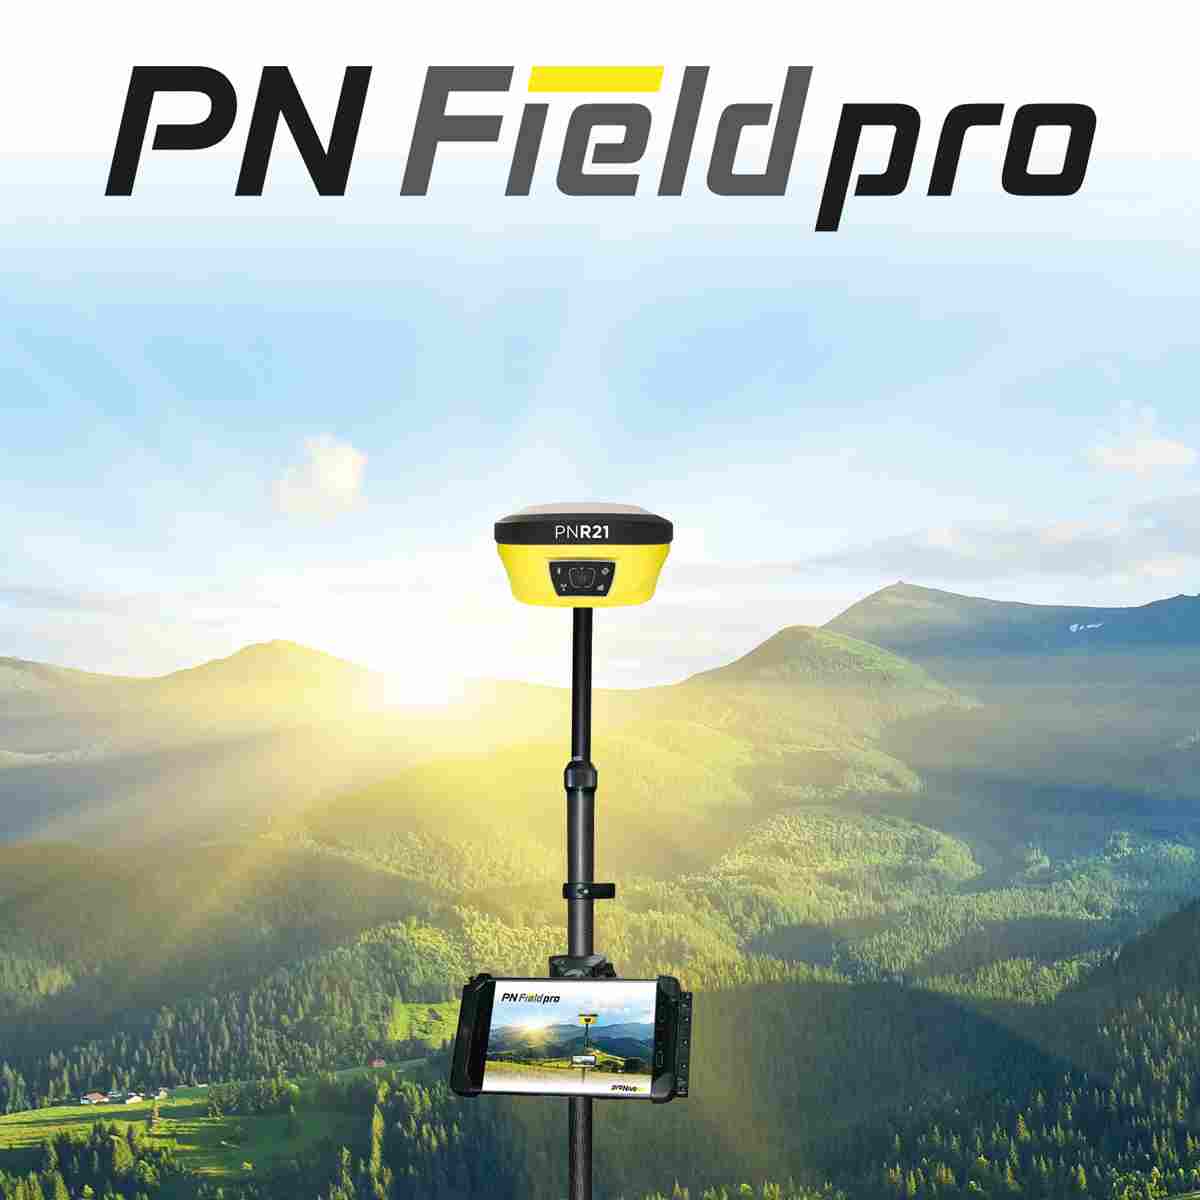 Android Messoftware PN Field pro 